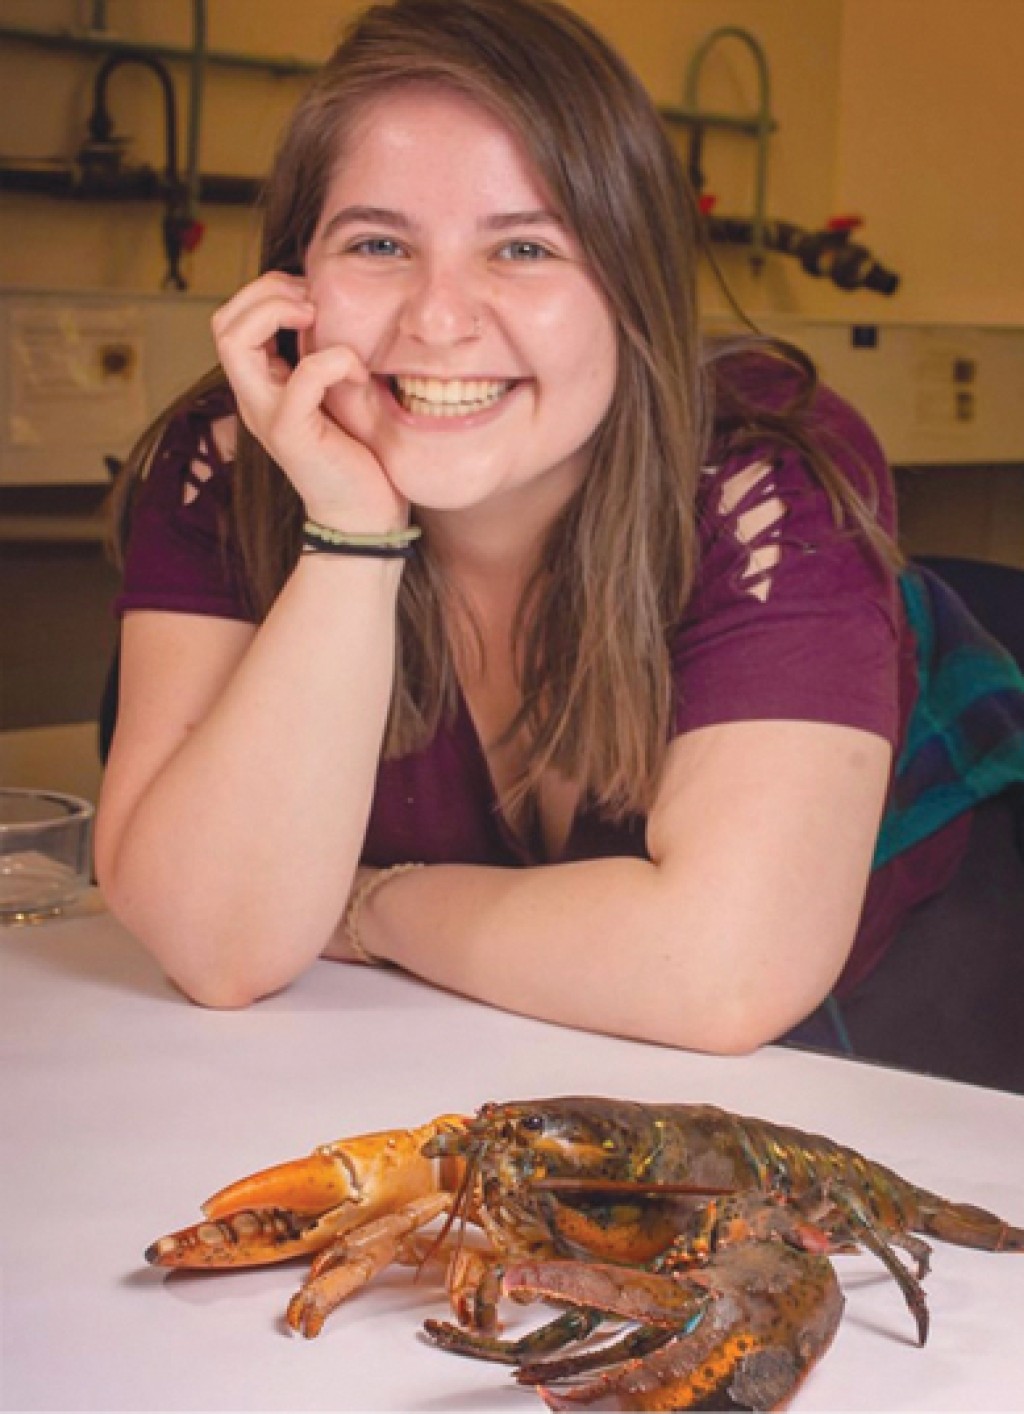 A U N E student smiles while sitting next to a lobster